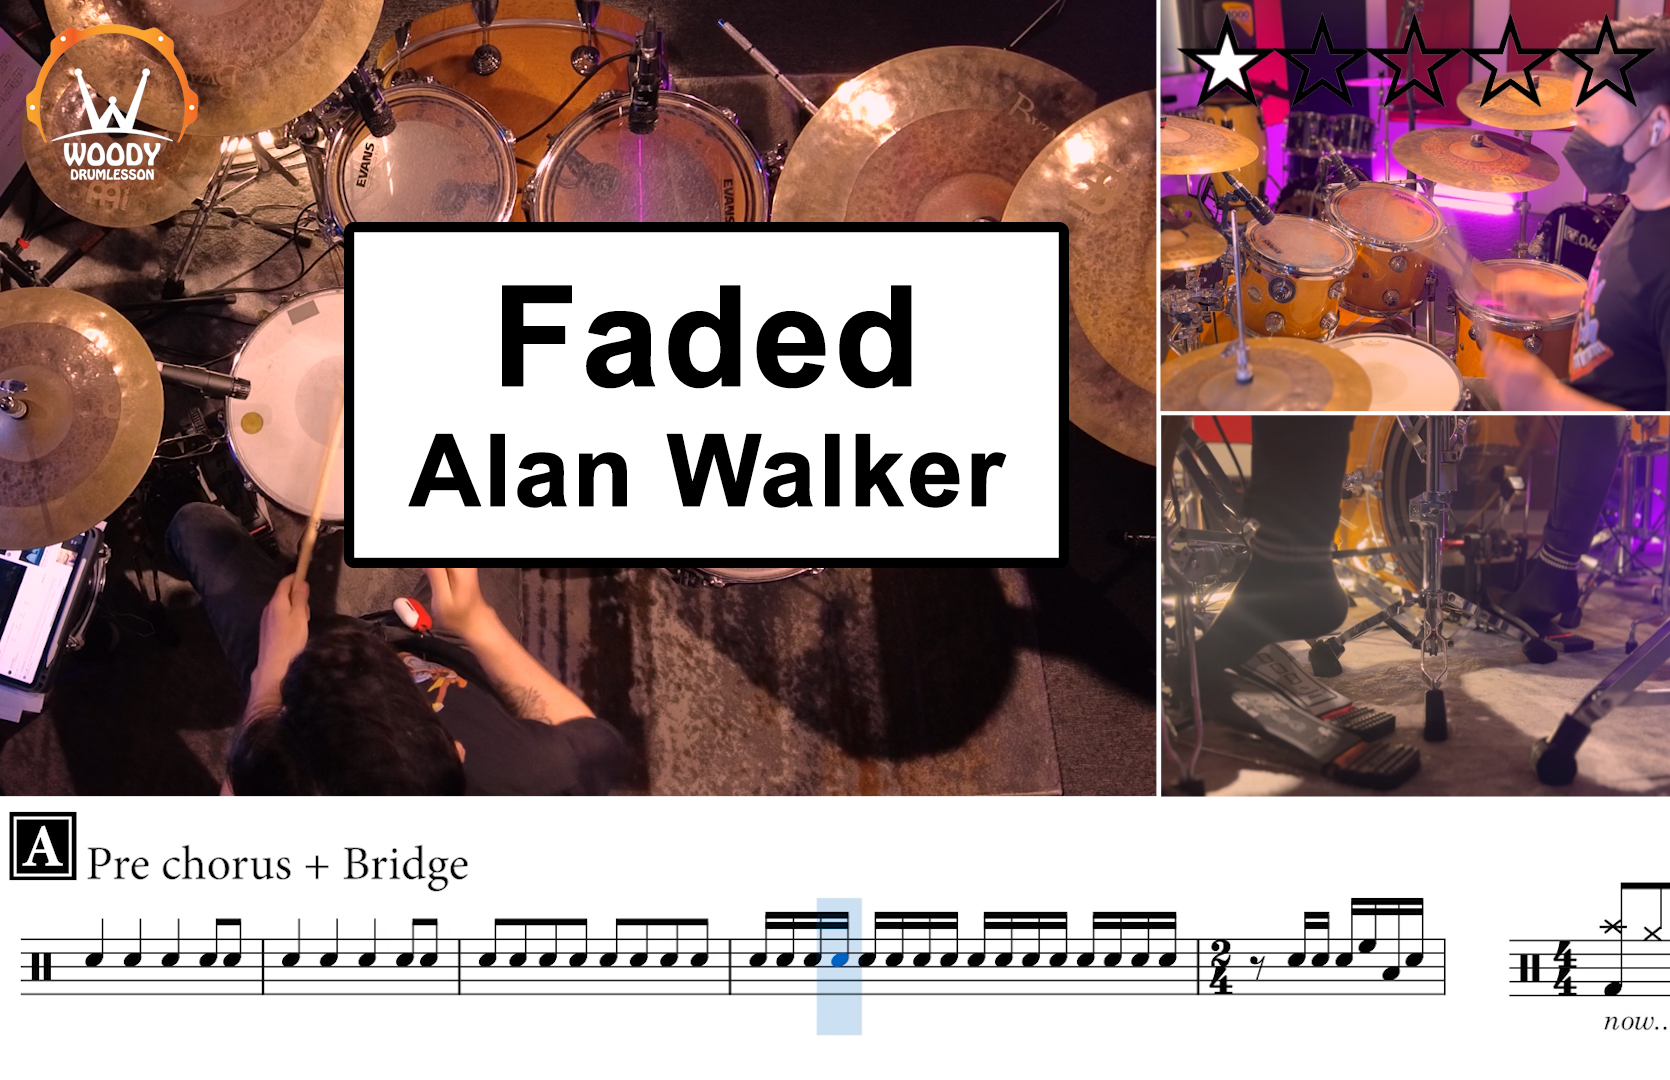 Faded - AlanWalker (★☆☆☆☆) Drum Cover, Score, Sheet Music, Lessons, Tutorial